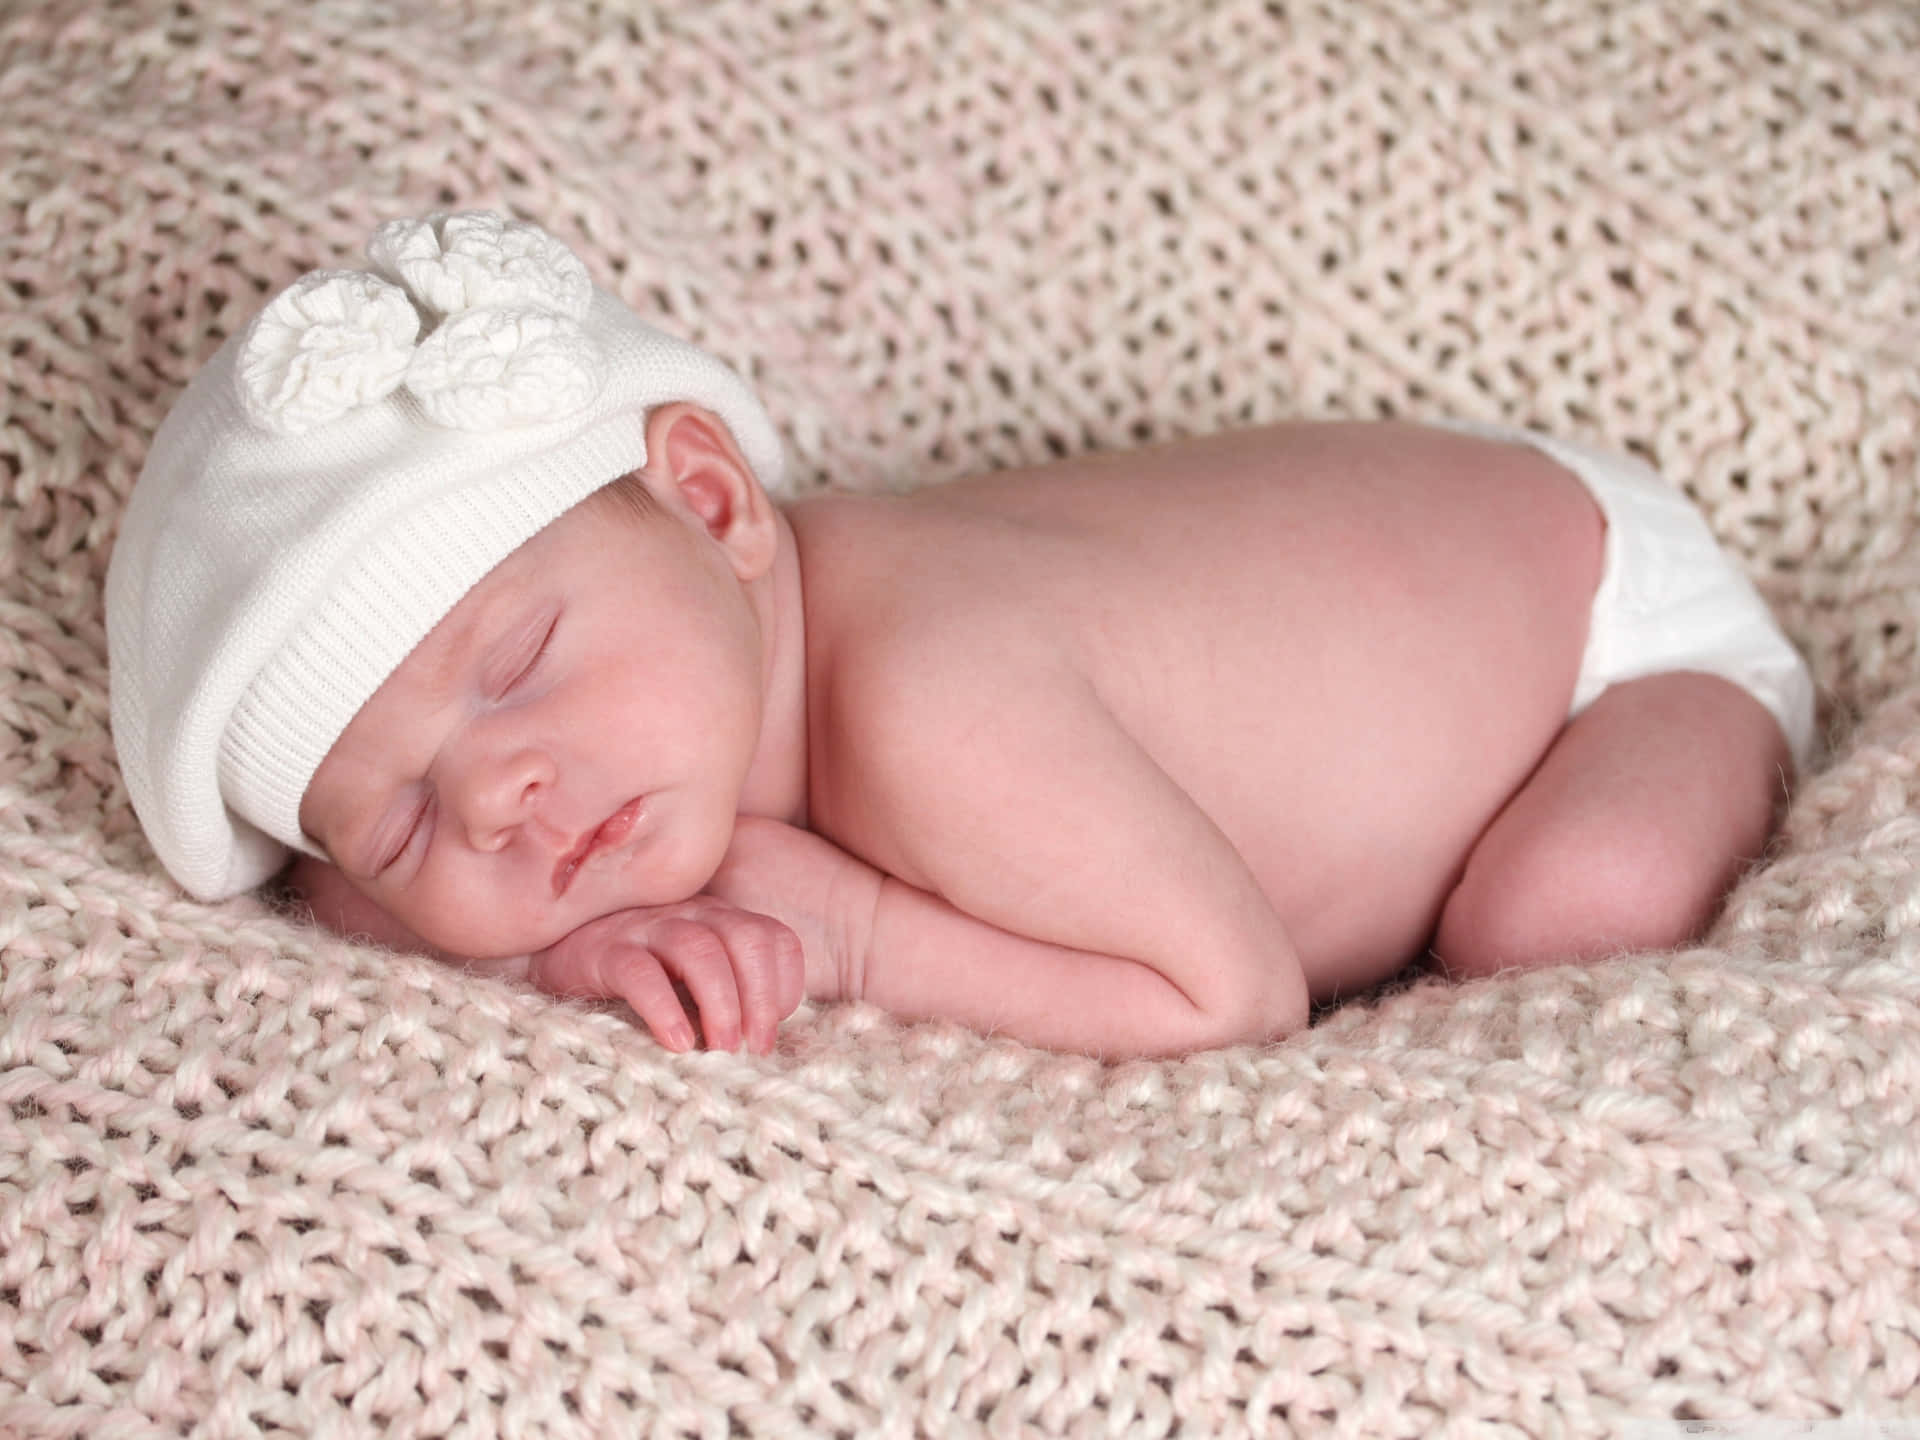 Sleeping New Born Baby With A White Cap Background